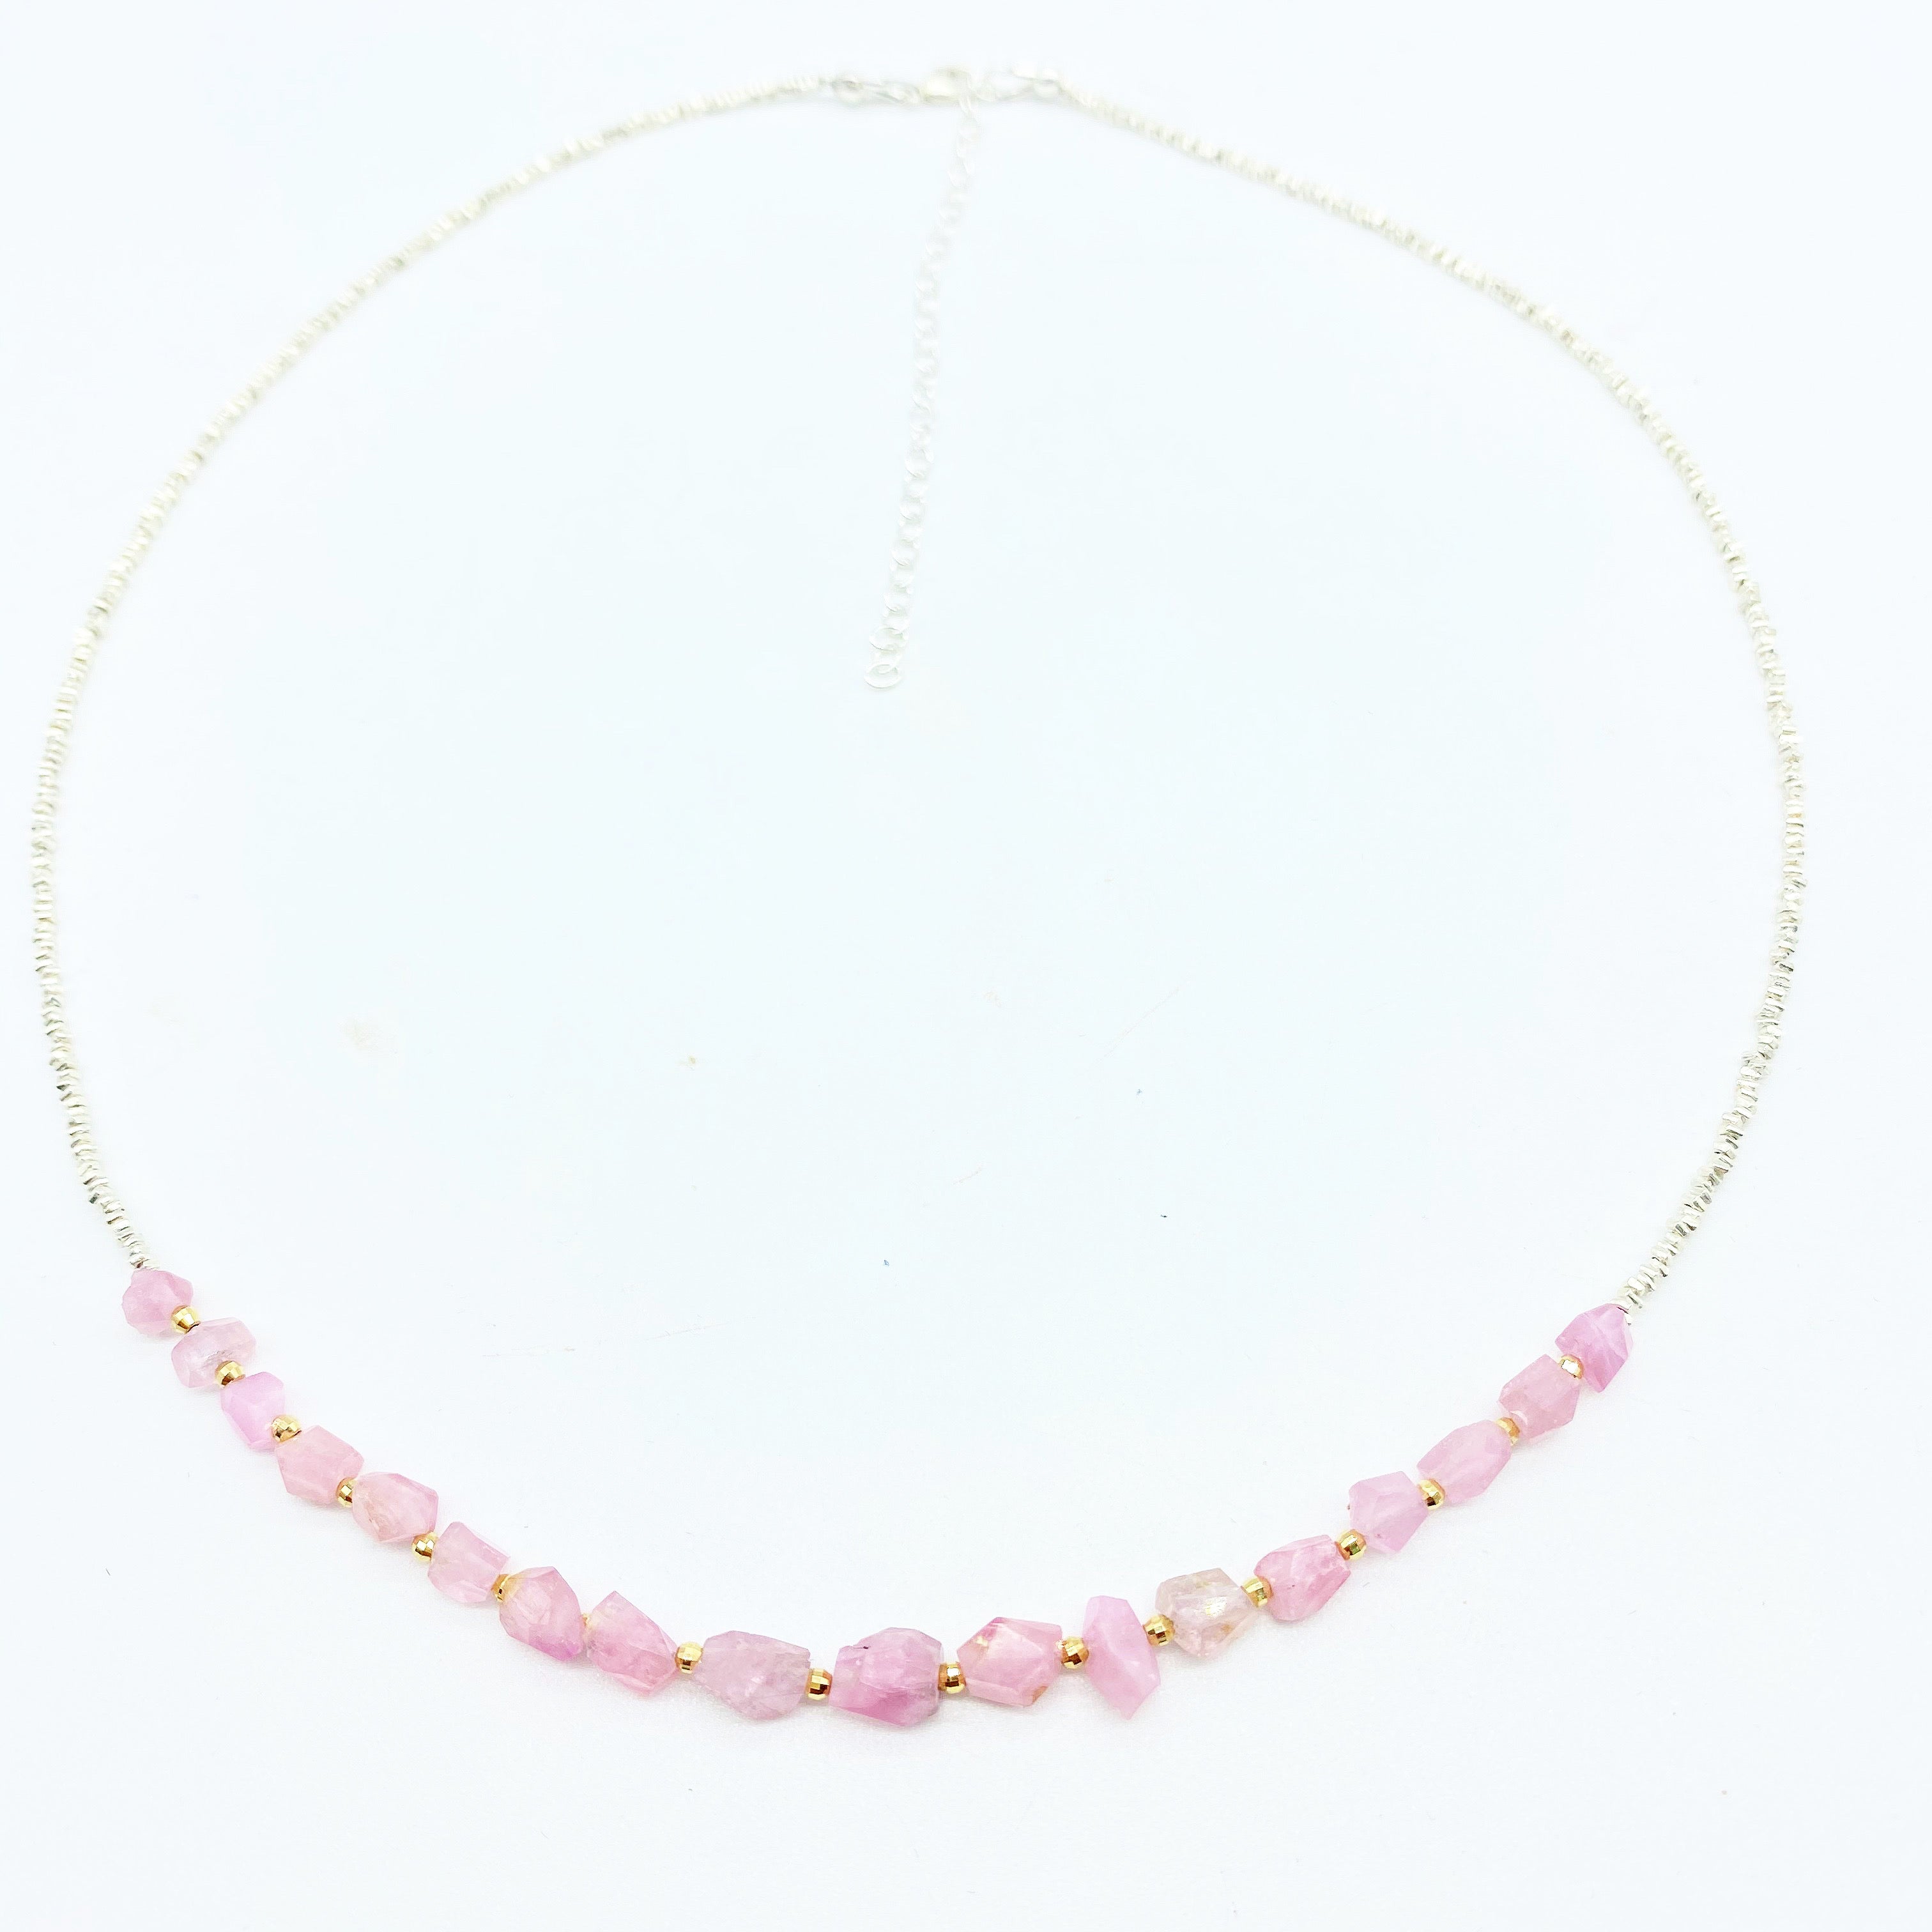 PINK TOURMALINE GYPSY NECKLACE GIFT